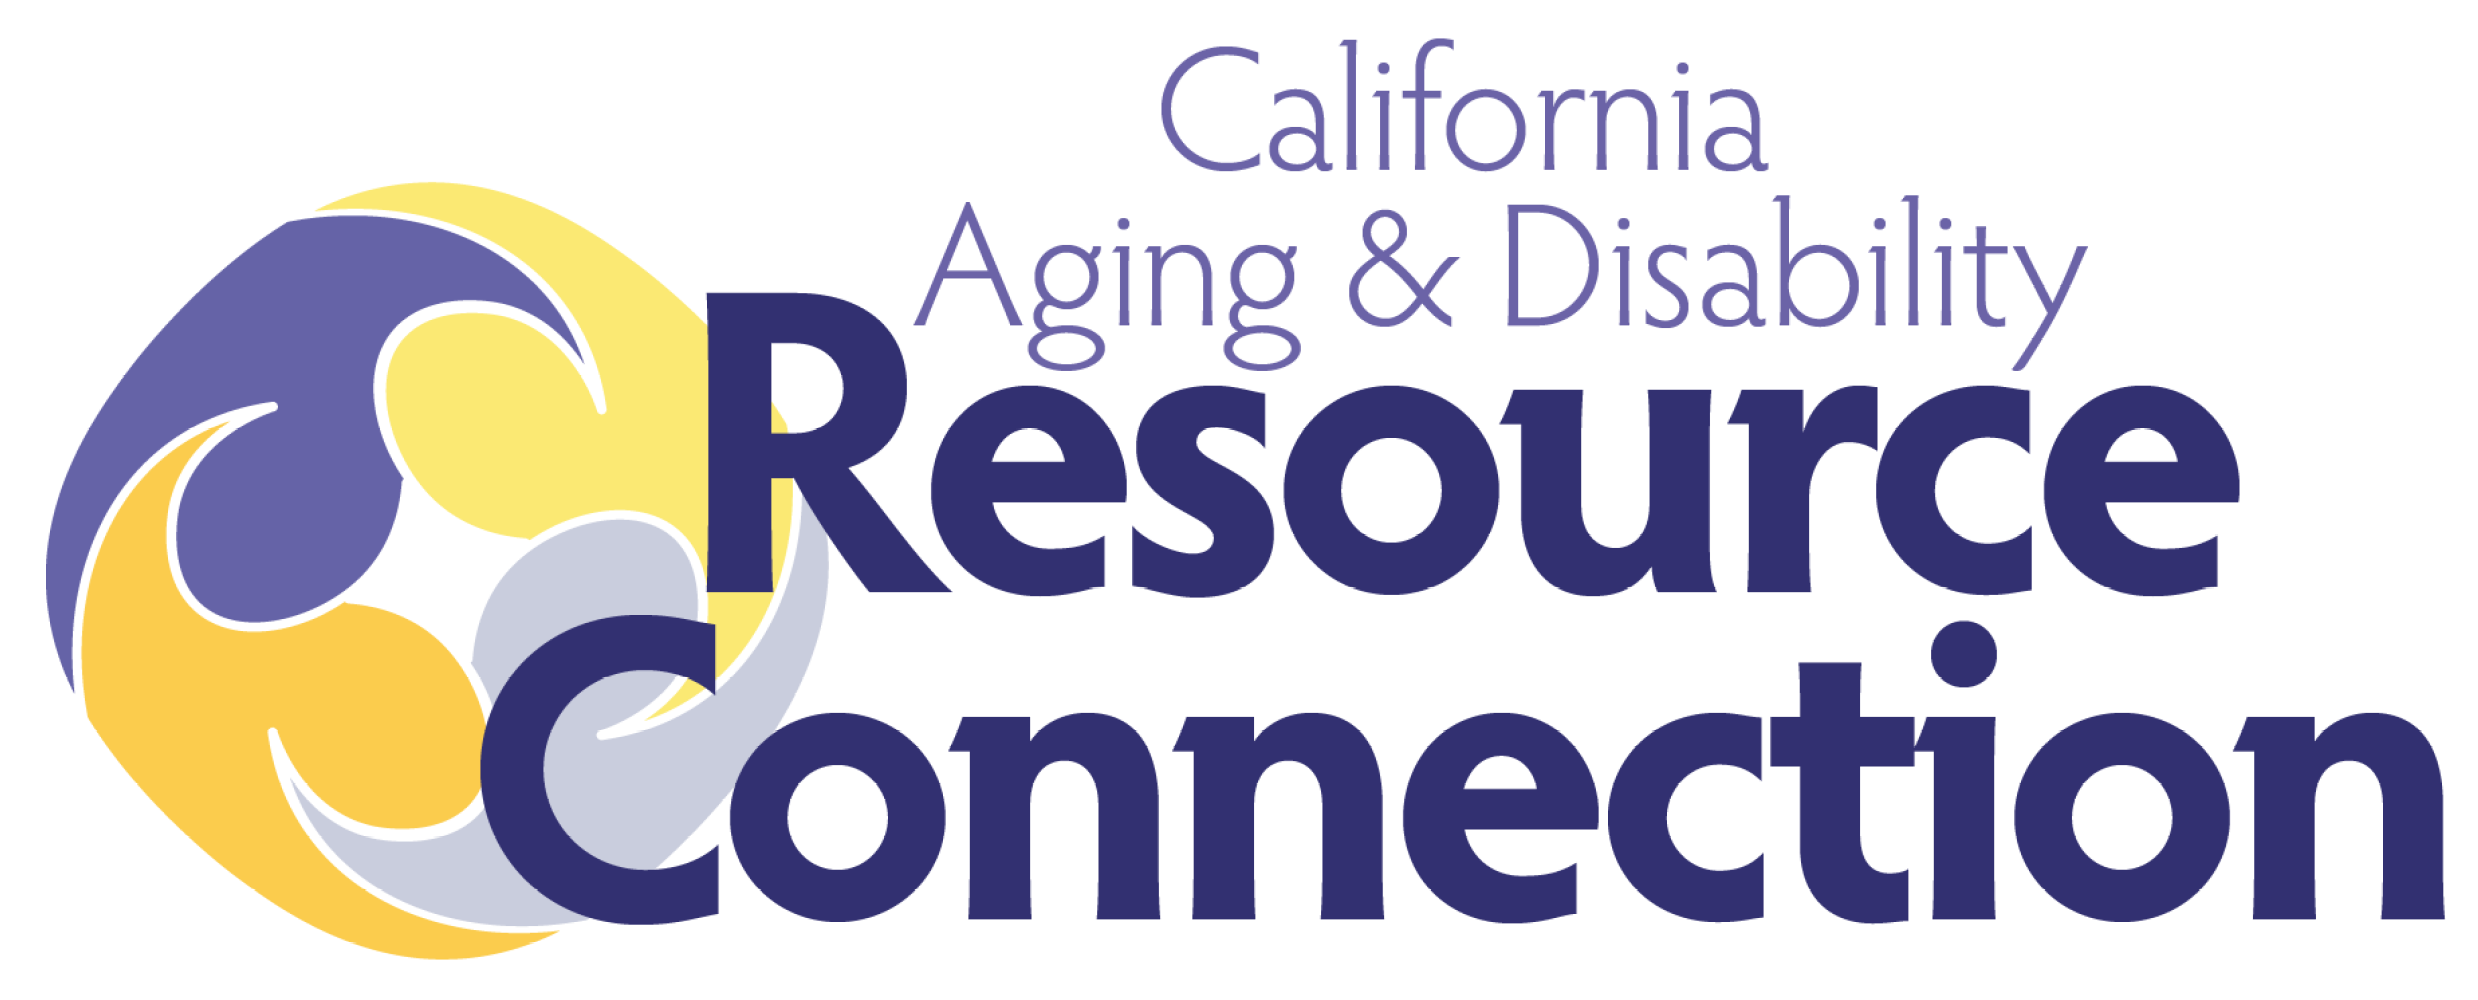 Aging and Disability Resource Connection Logo